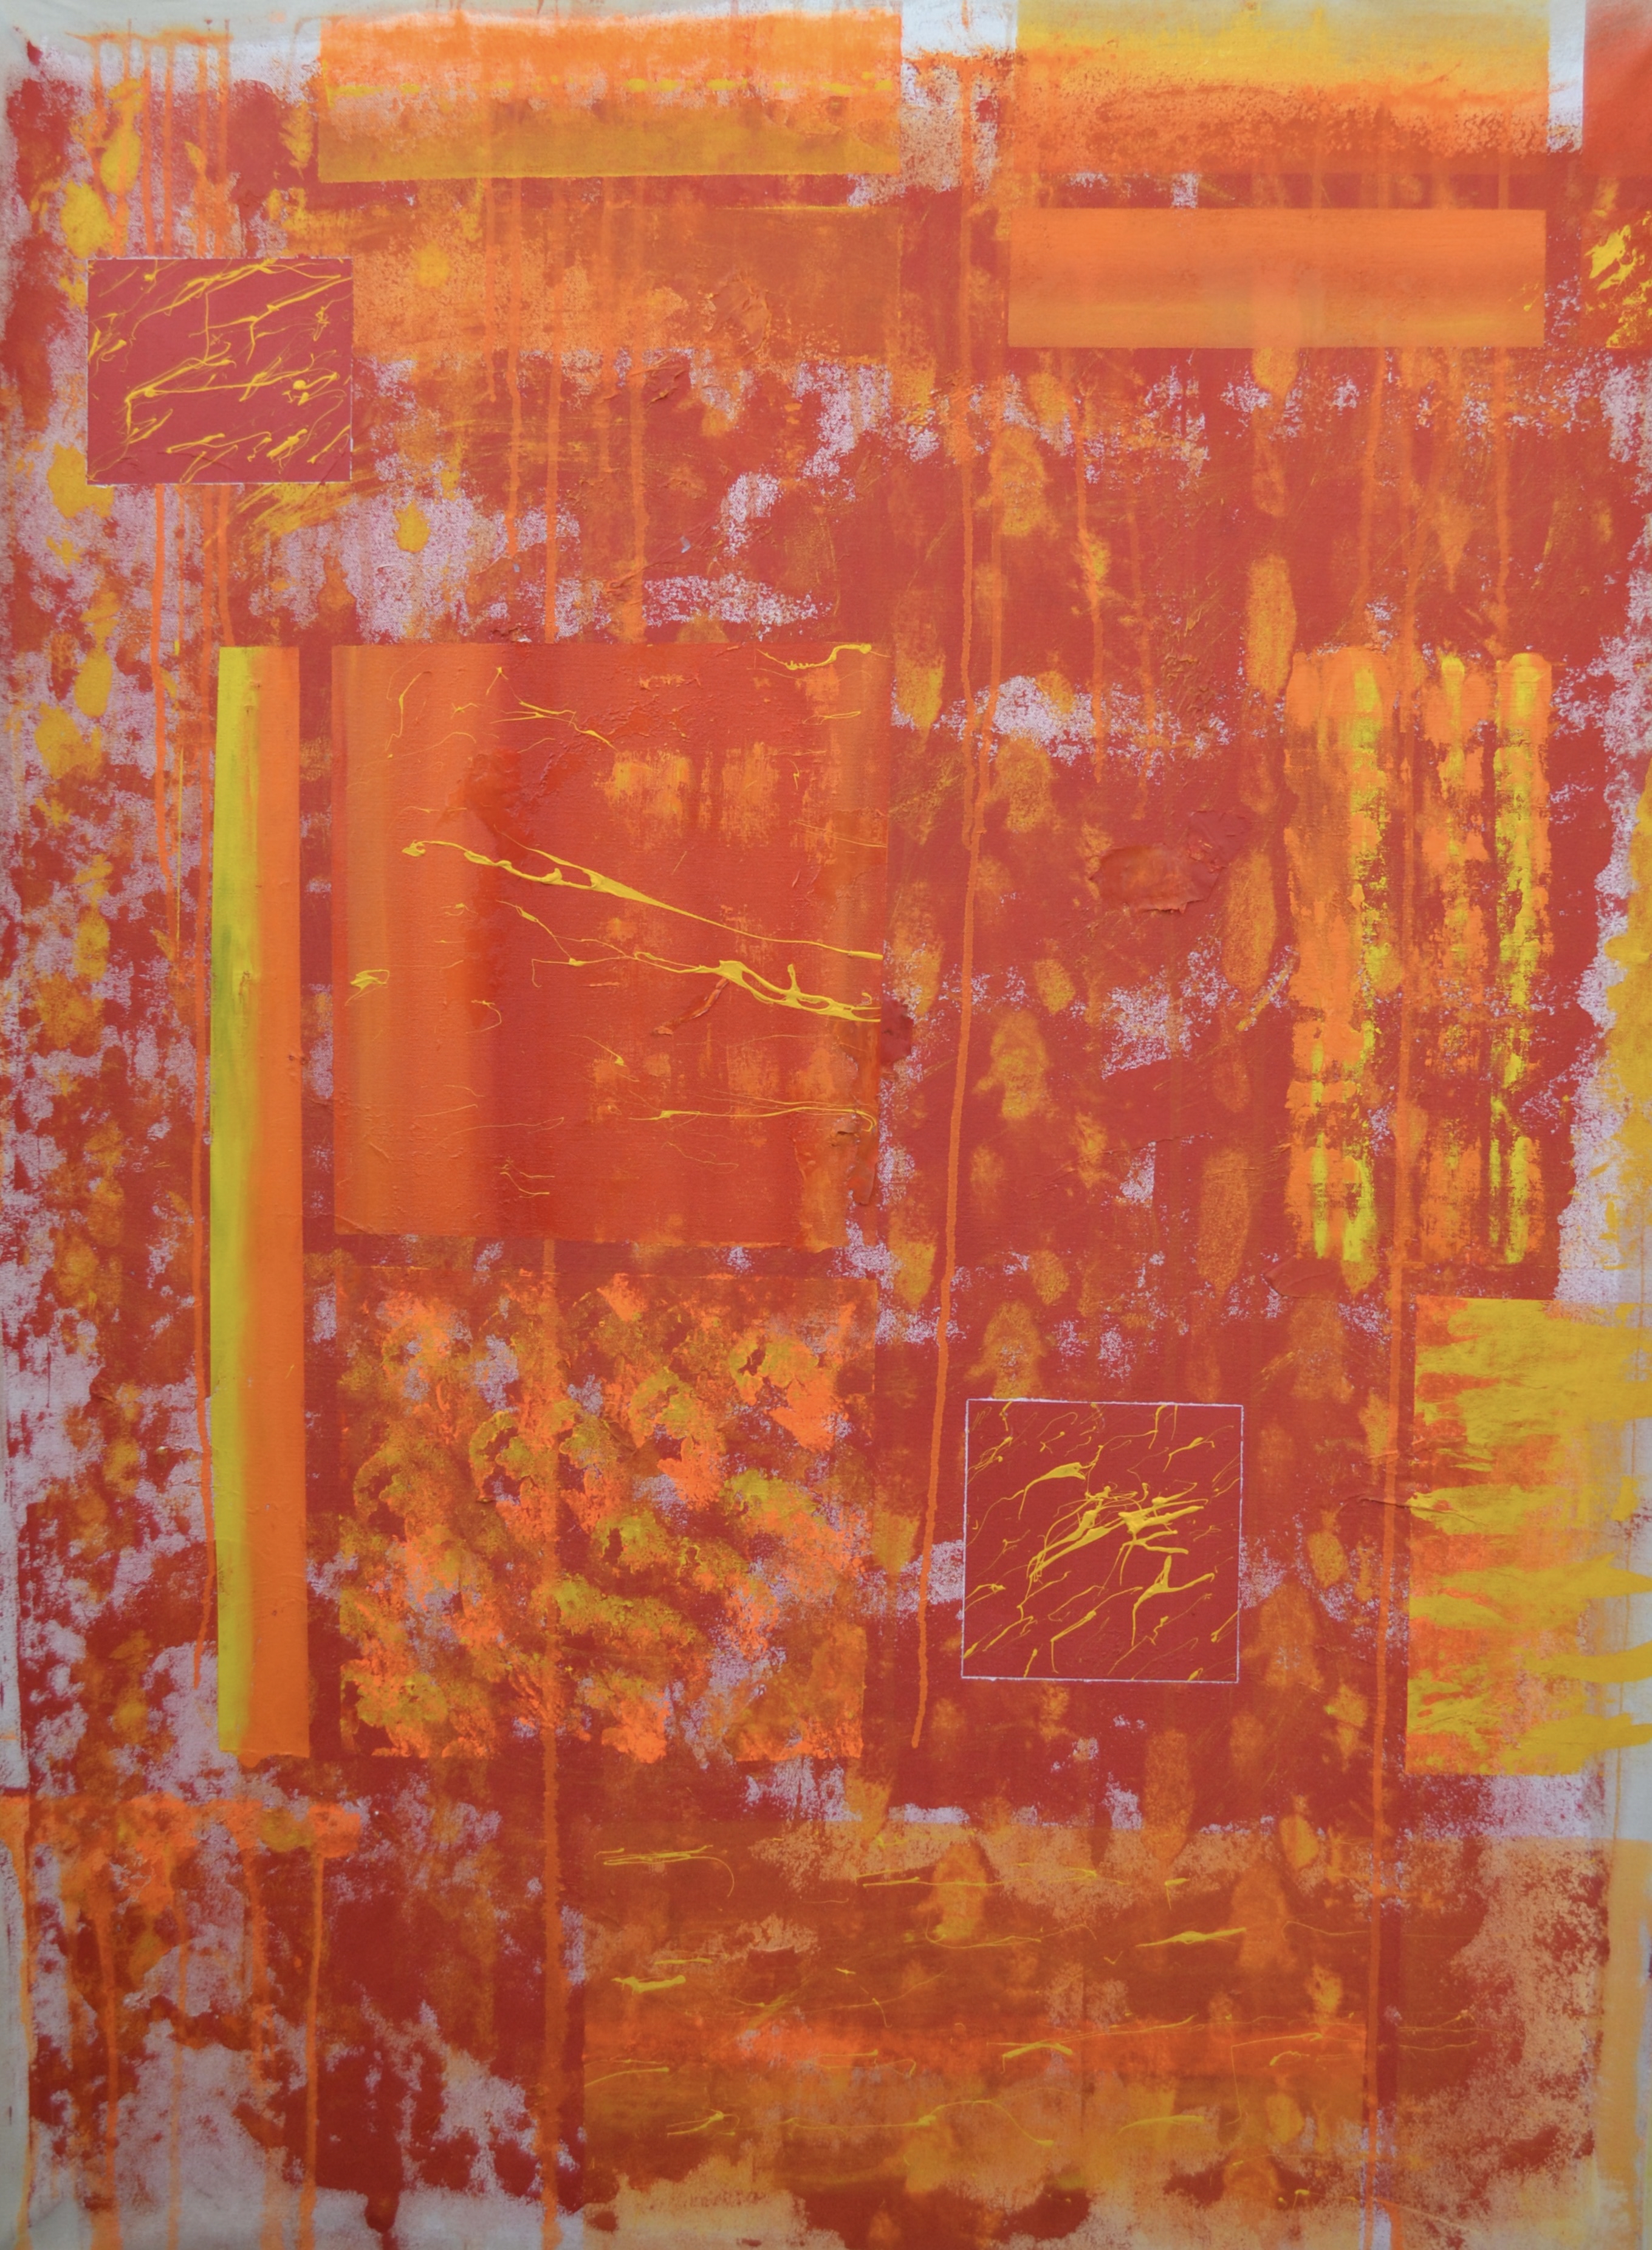 orange, red, yellow brush strokes that look like skid marks and sooth transitions 